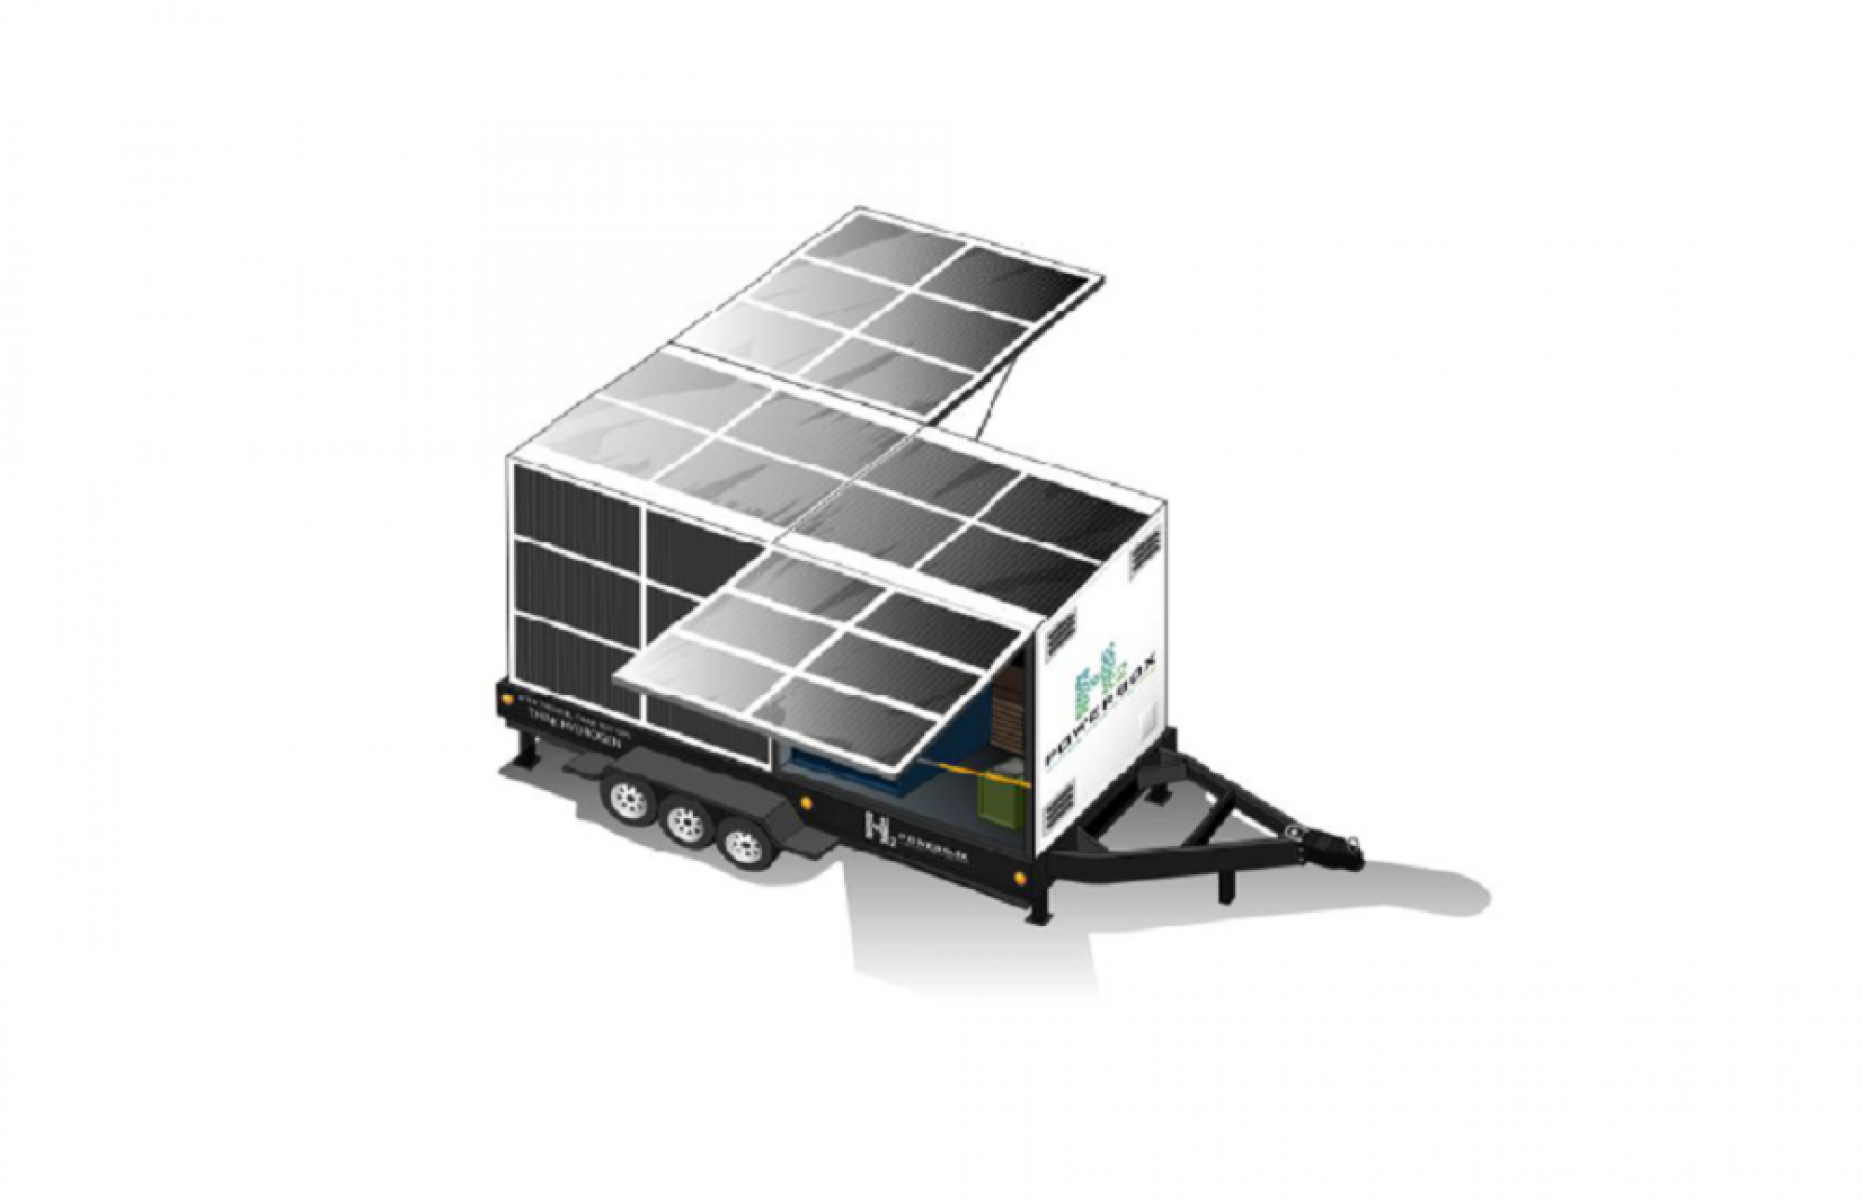 A sketch of the H2PowerBox shows its trailer-mounted design with solar panels on top